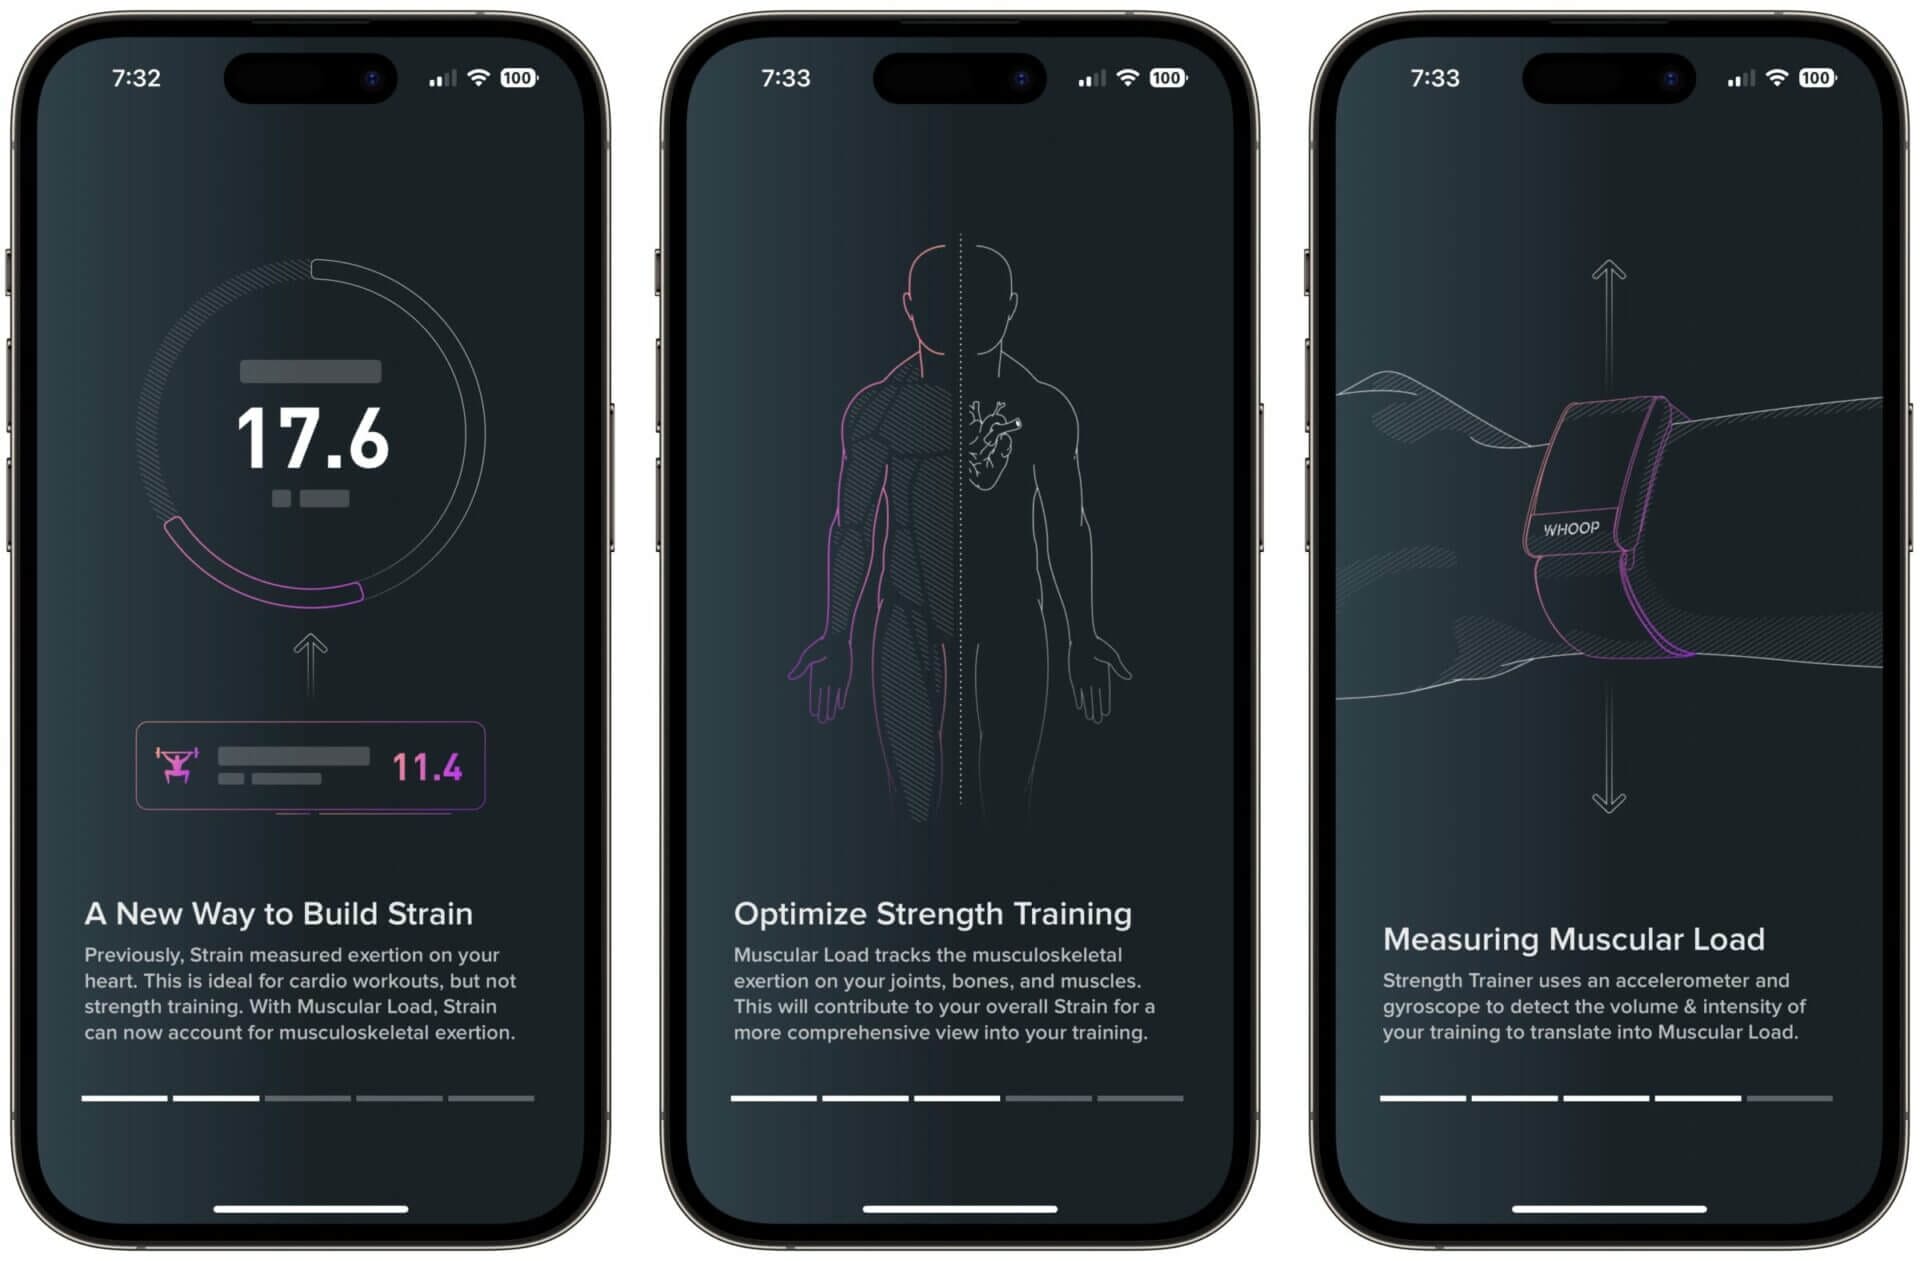 WHOOP can now measure muscular load and incorporate it into your strain score